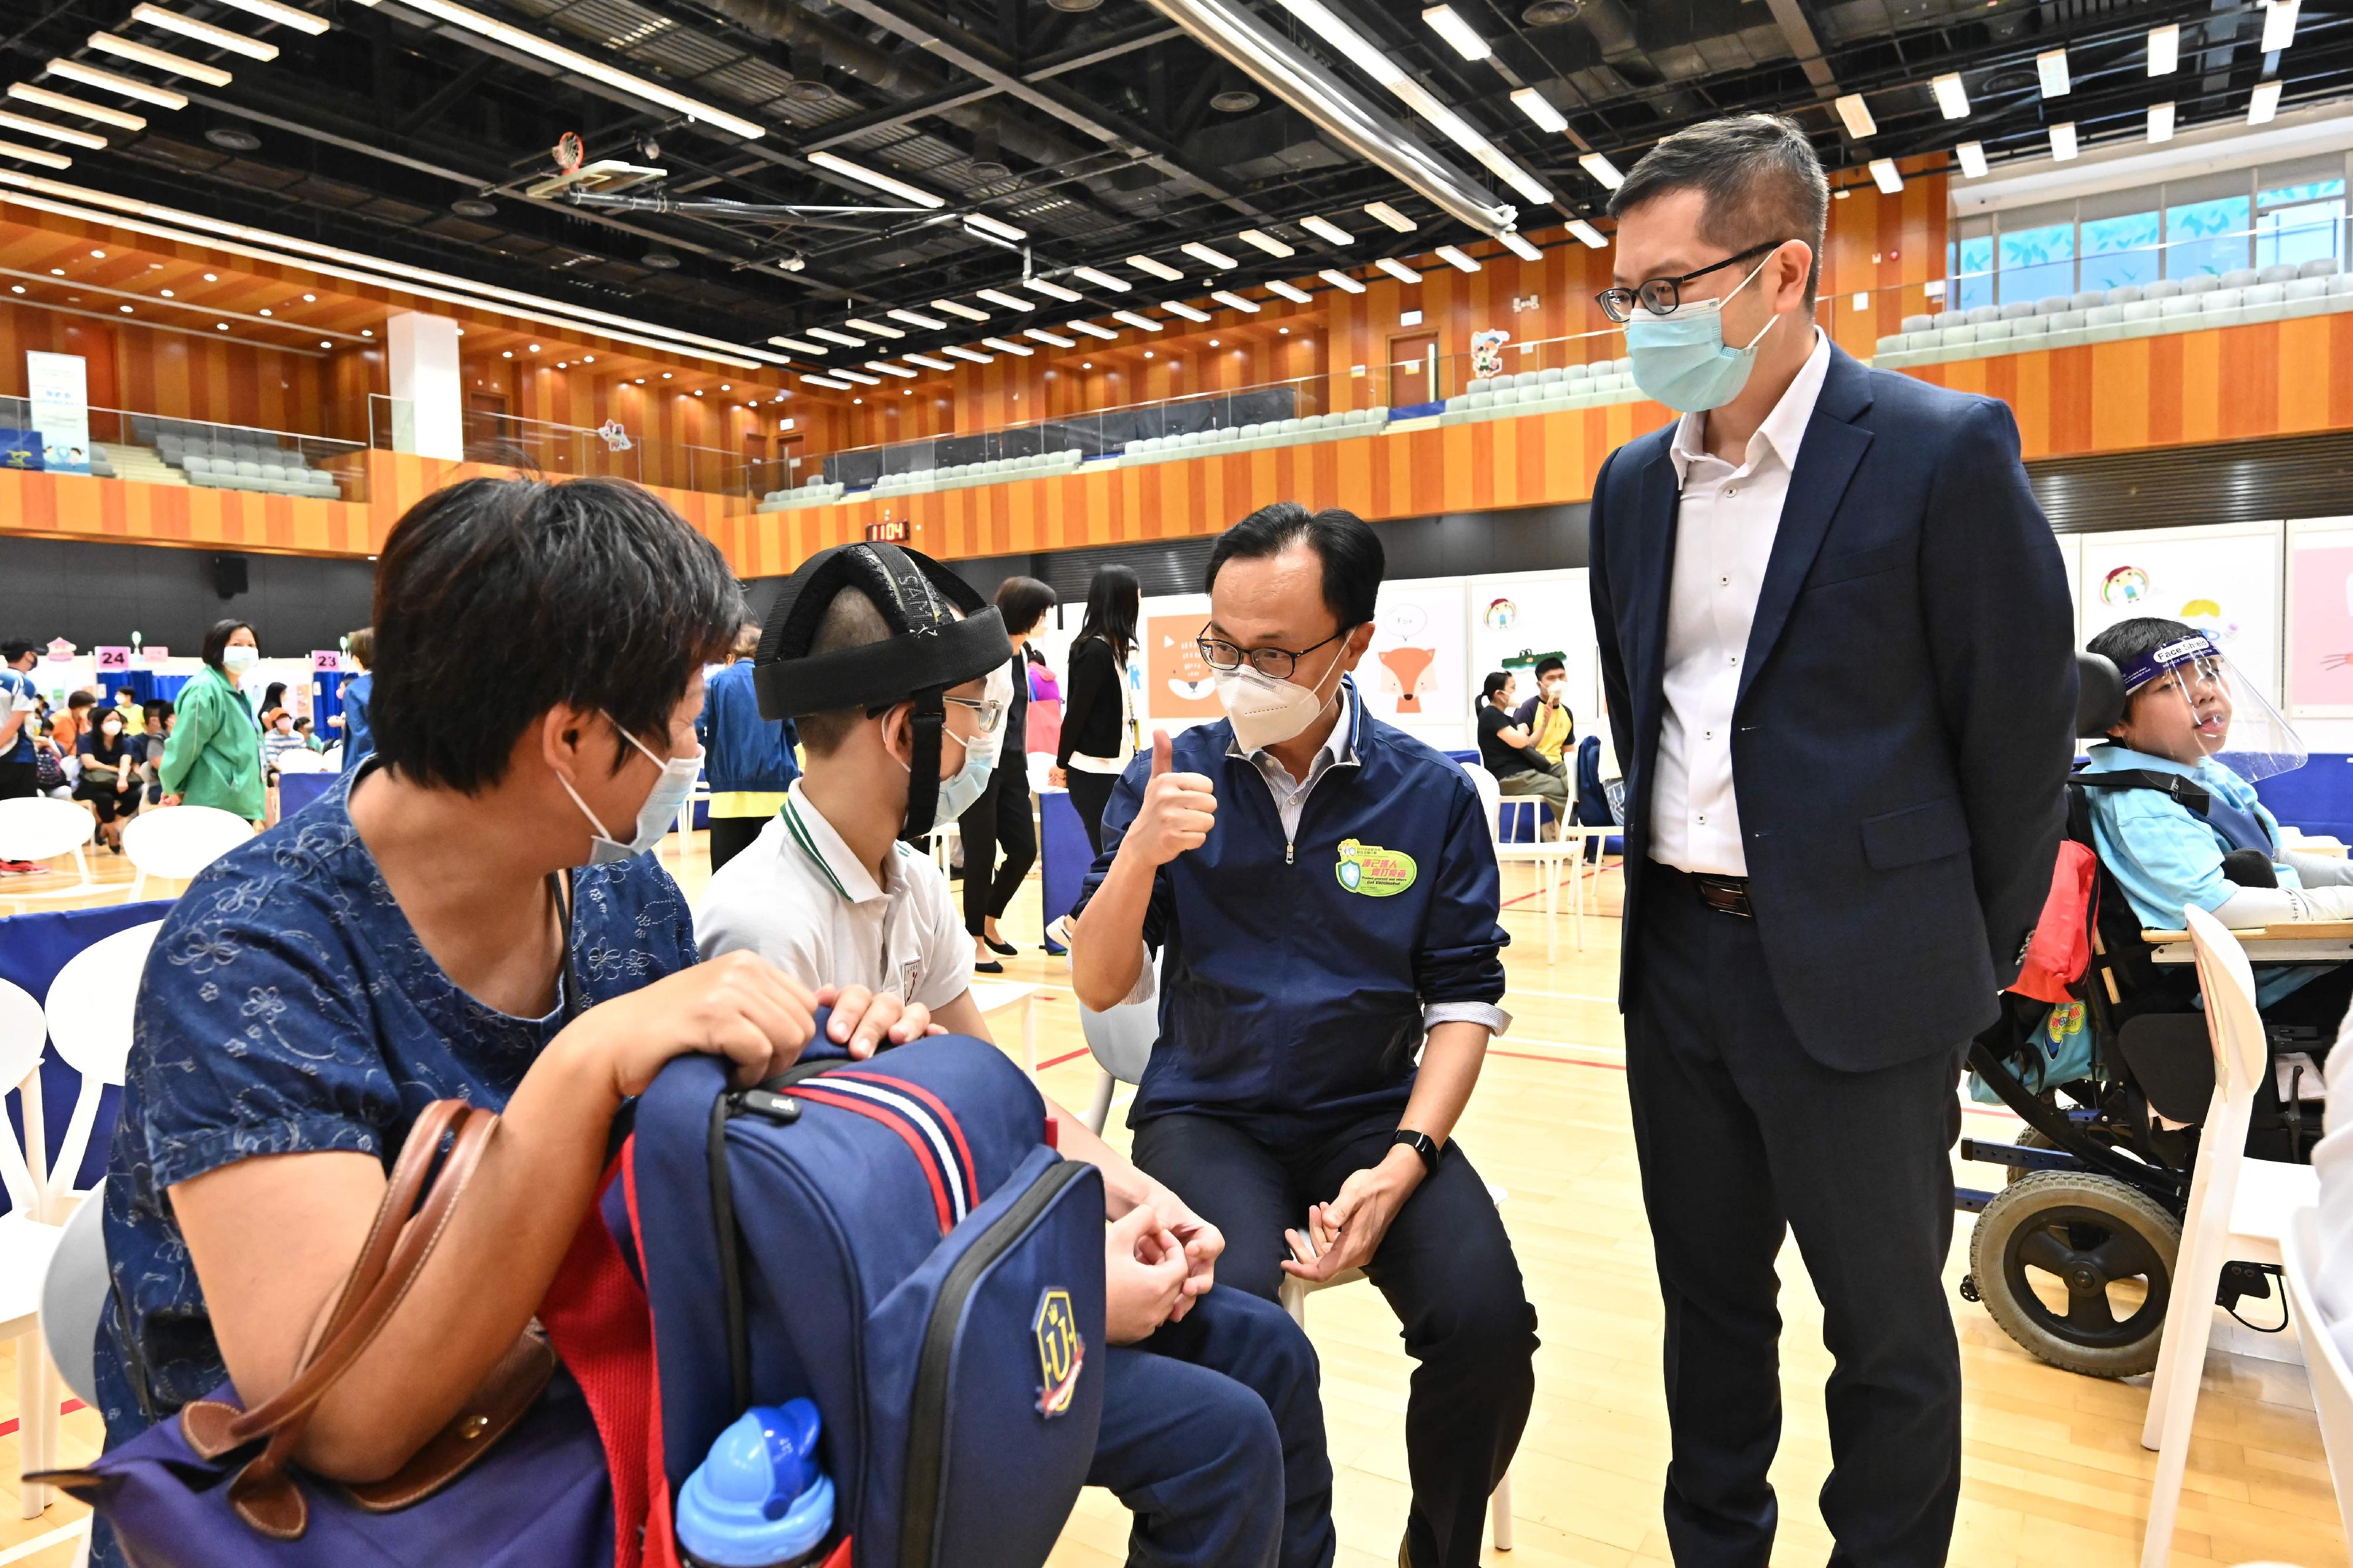 Around 300 students from 37 special schools were arranged to receive the BioNTech vaccine at the Children Community Vaccination Centres (CCVCs) at Yuen Chau Kok Sports Centre in Sha Tin and Hong Kong Children's Hospital in Kowloon Bay at special booking time slots this morning (April 27). Photo shows the Secretary for the Civil Service, Mr Patrick Nip (second right), giving encouragement to a student at the CCVC at Yuen Chau Kok Sports Centre in Sha Tin. Looking on is the Principal of the SAHK Jockey Club Elaine Field School, Mr Suen Yau-man (first right).